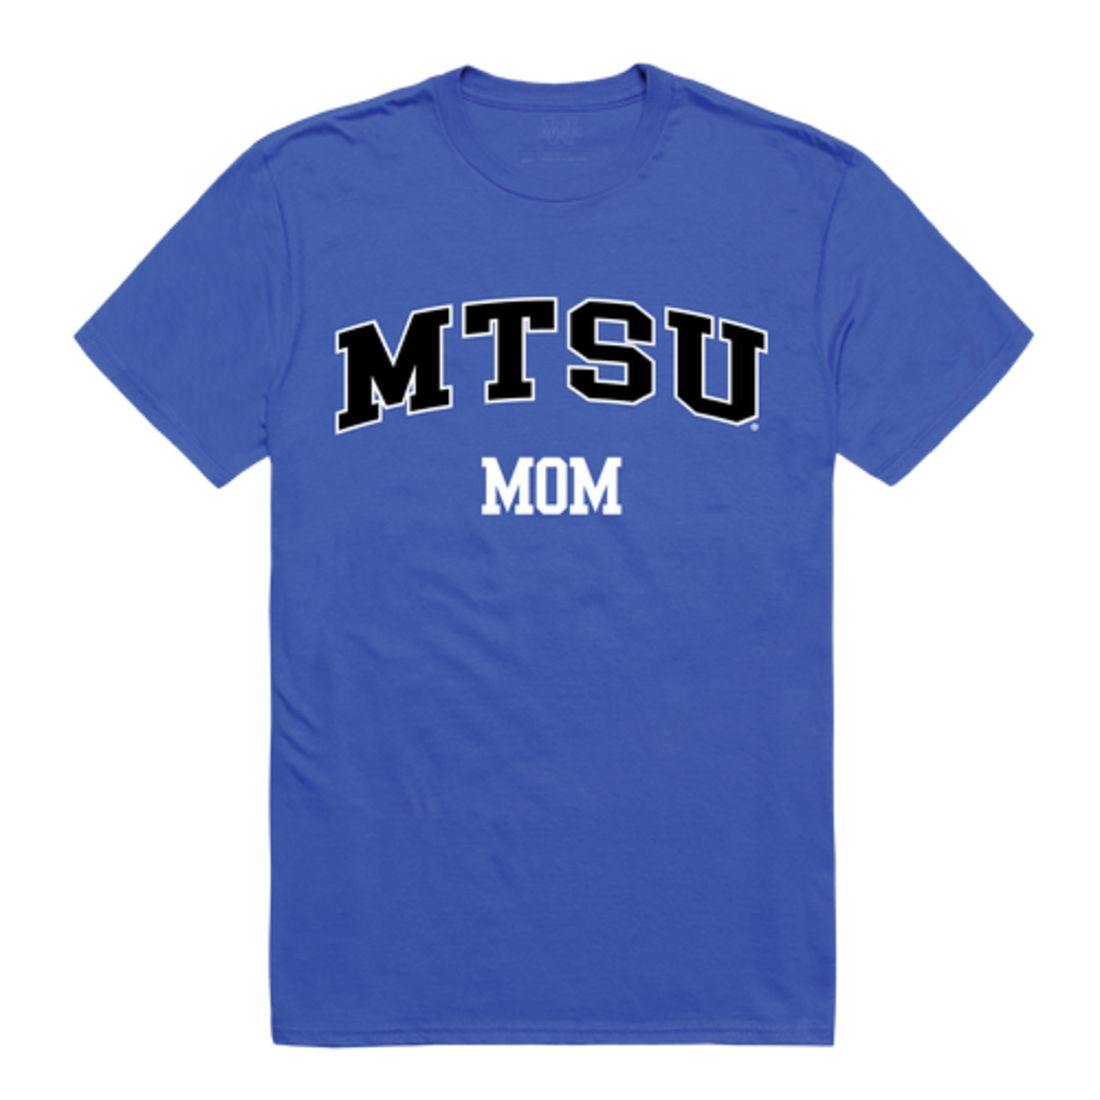 MTSU Middle Tennessee State University Blue Raiders College Mom Womens T-Shirt-Campus-Wardrobe